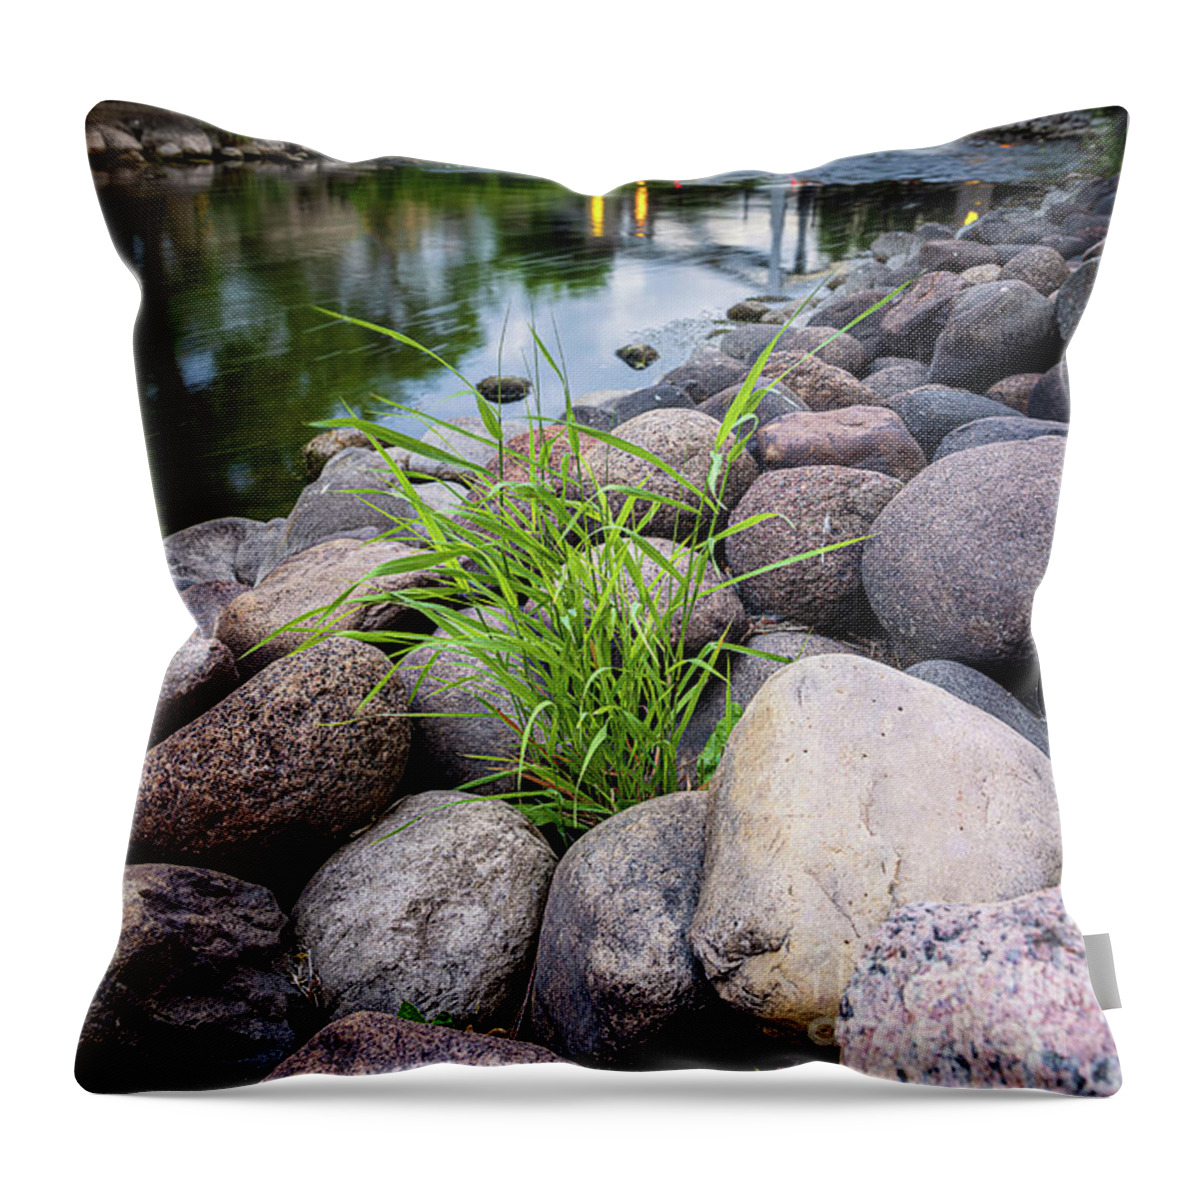 City Throw Pillow featuring the photograph Fox River Love Bridge by Andrew Slater